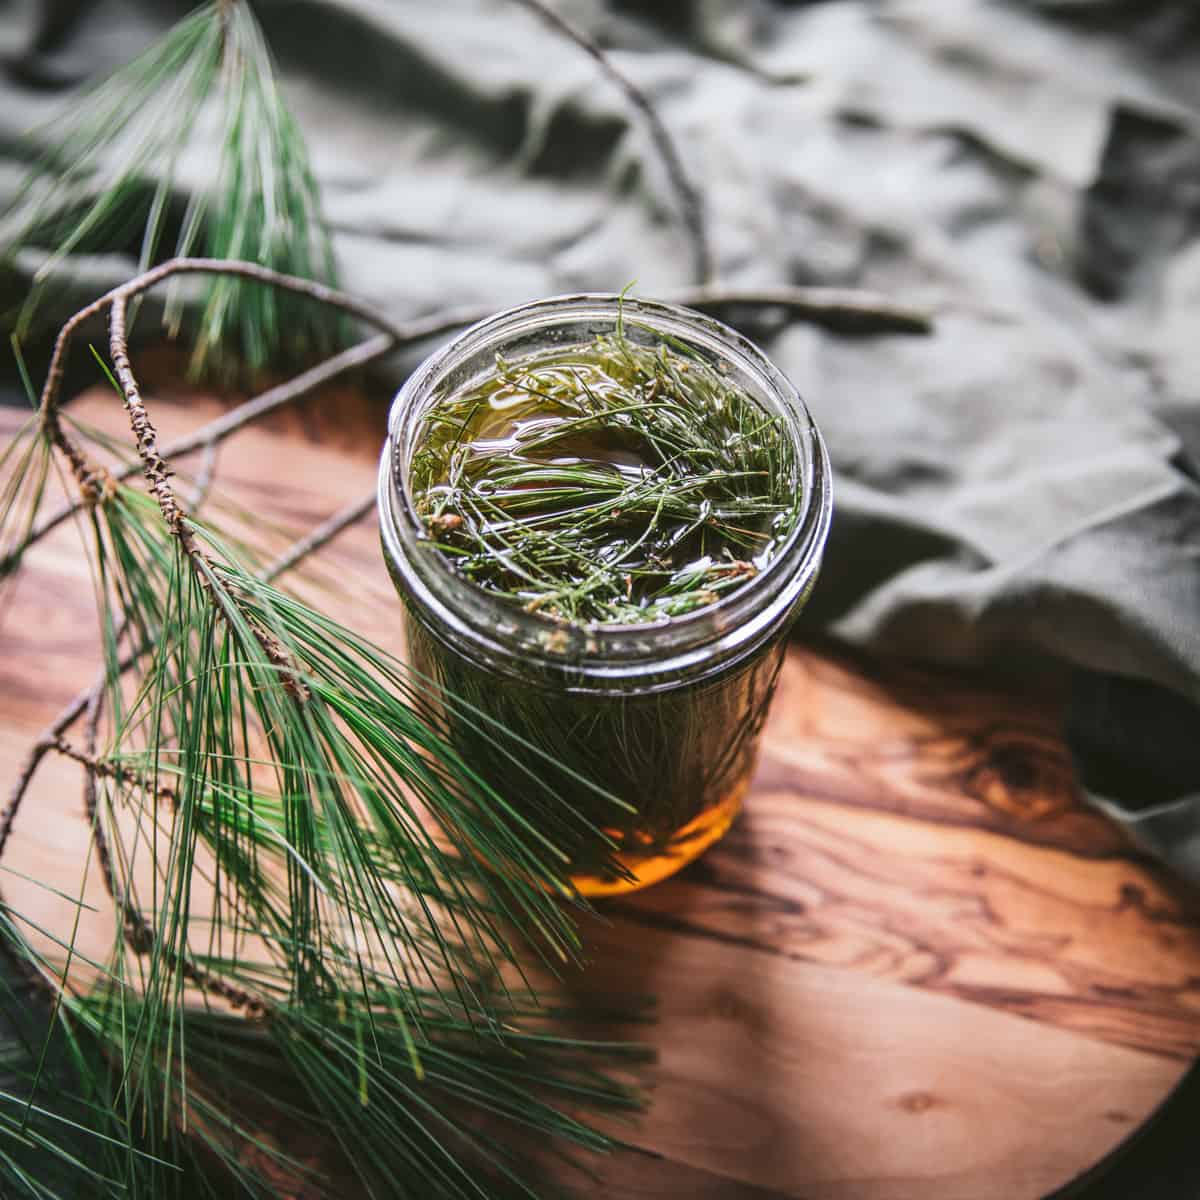 Top view of a jar of honey infusing with pine needles, on a wooden cutting board surrounded by fresh pine fronds.